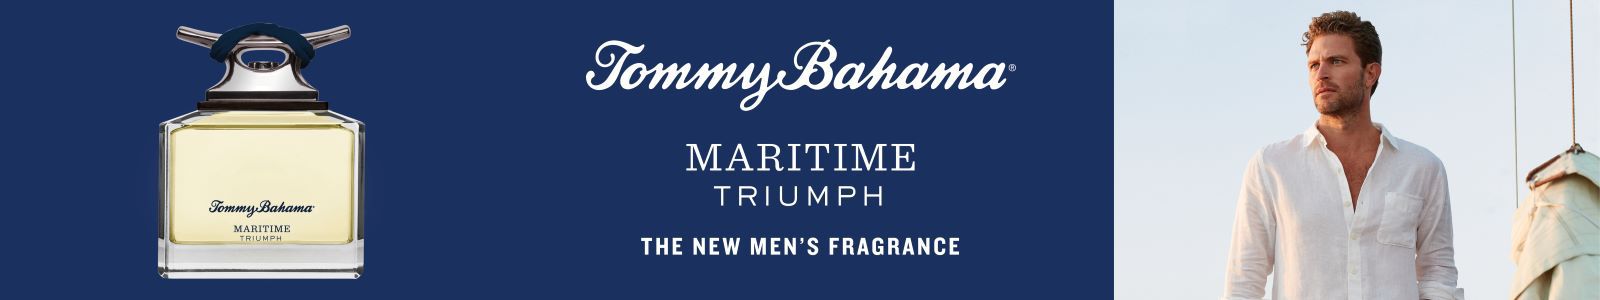 Tommy Bahama, Maritime Triumph, The New Men's Fragrance